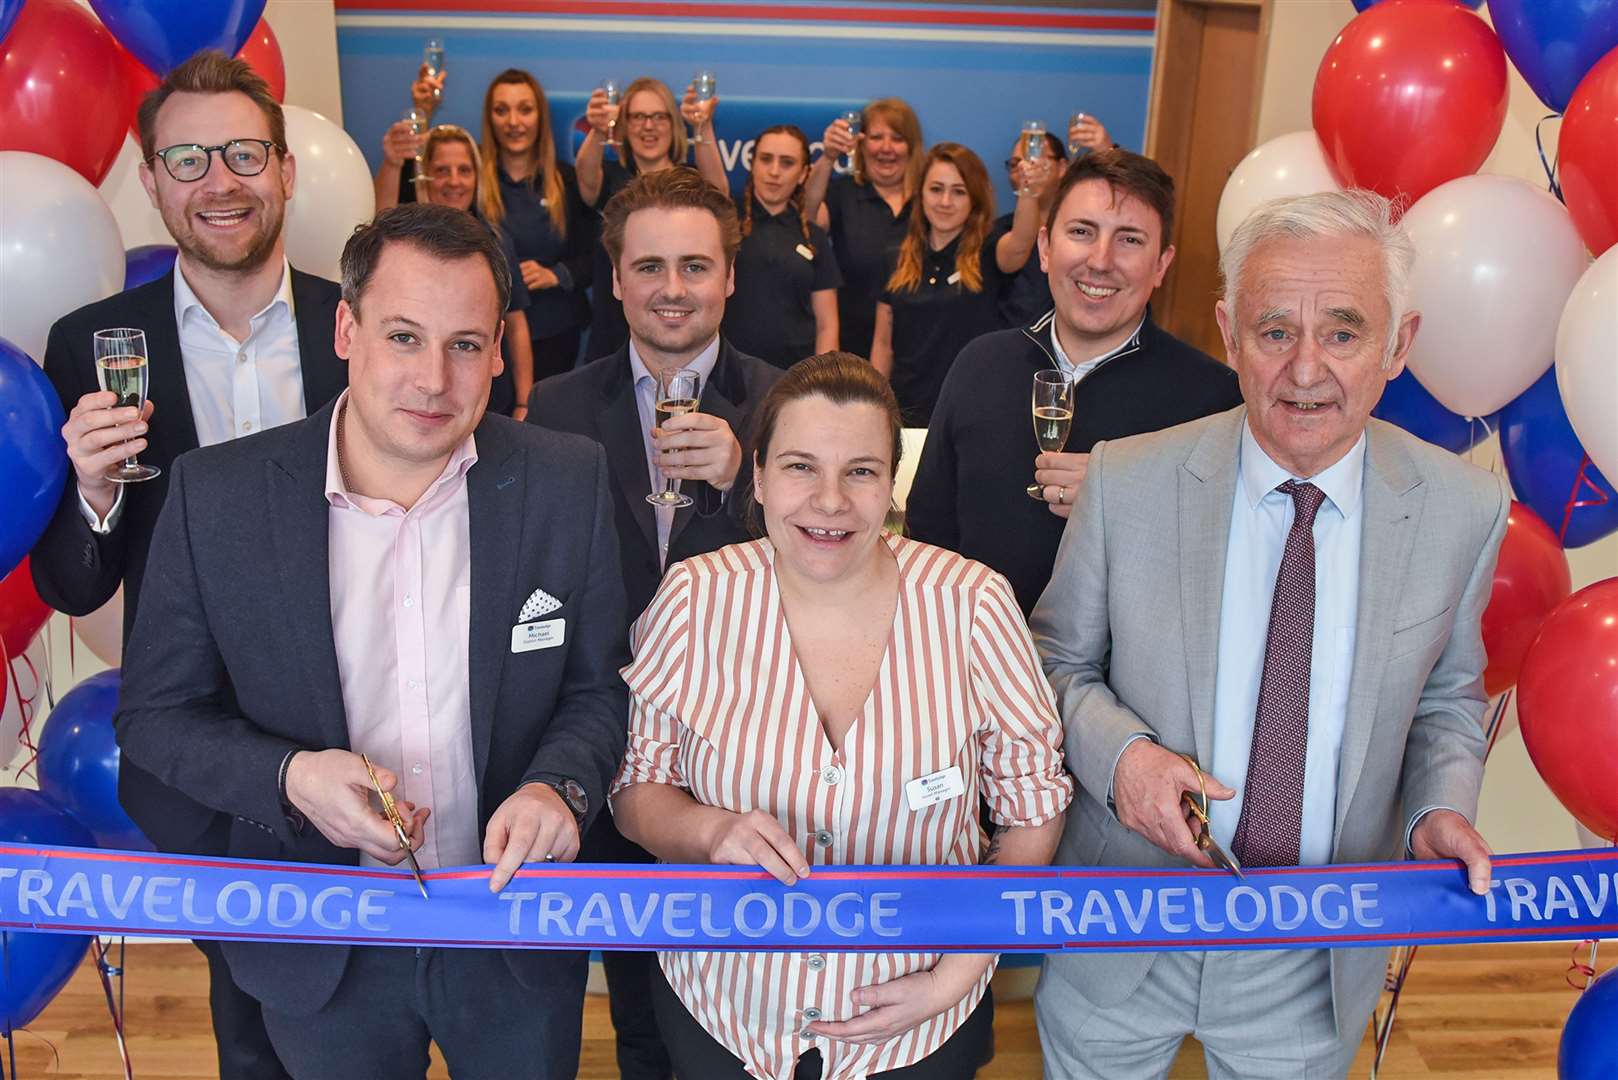 Opening the hotel, Travelodge district manager for Kent, Michael Johnstone, hotel manager, Suzan Ezzi and leader of Swale council, Cllr Roger Truelove (Lab)